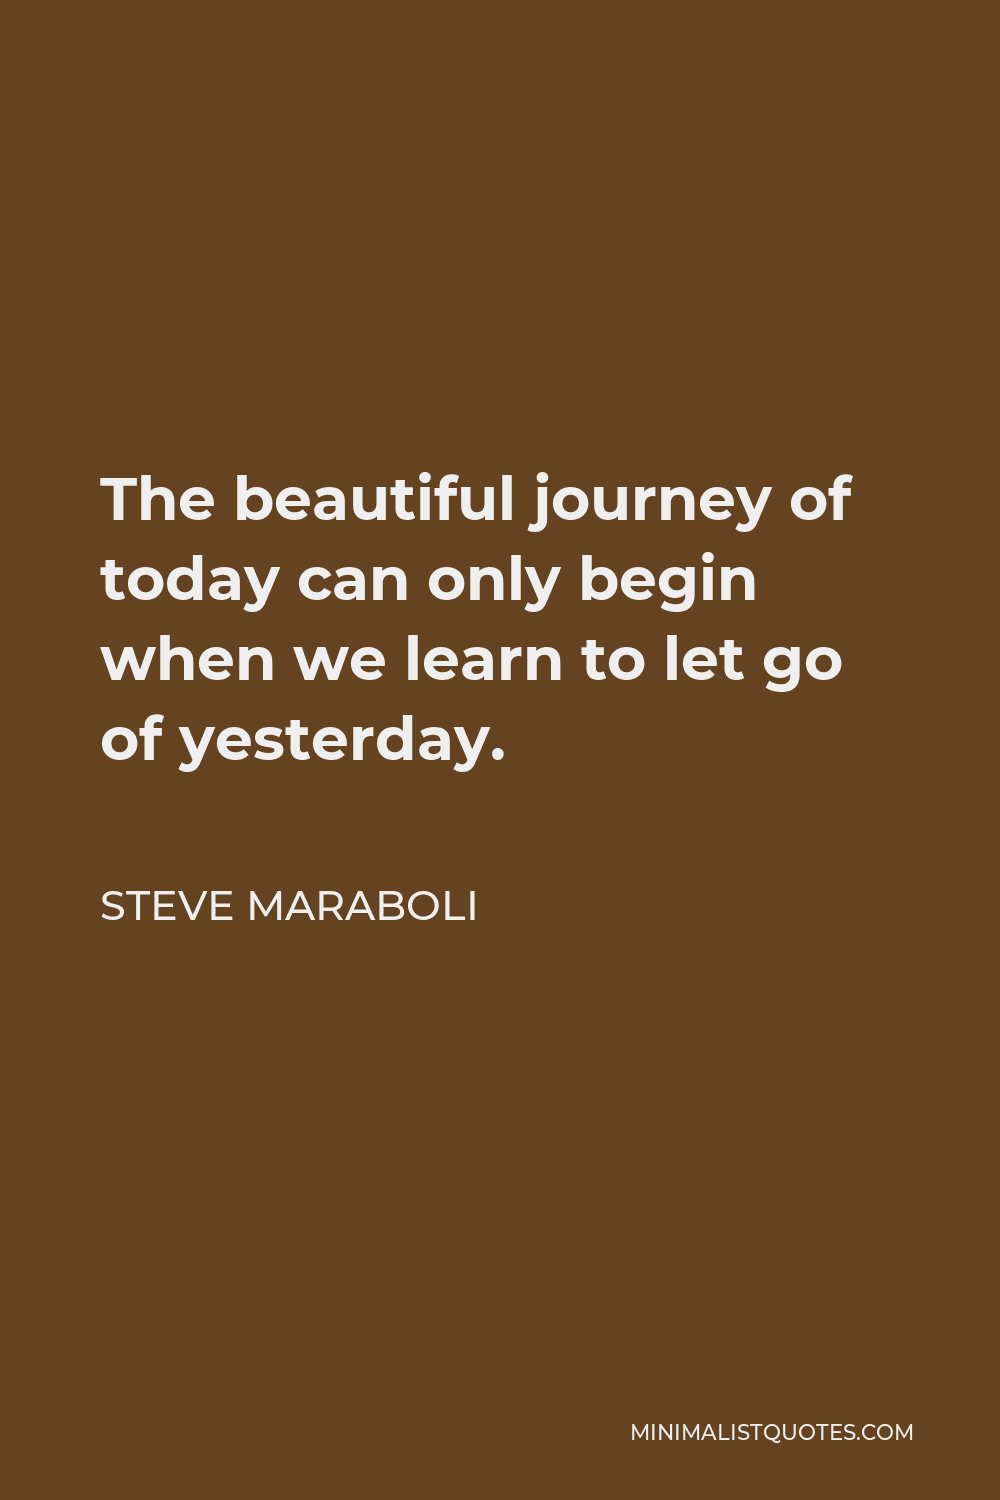 Steve Maraboli Quote - The beautiful journey of today can only begin when we learn to let go of yesterday.